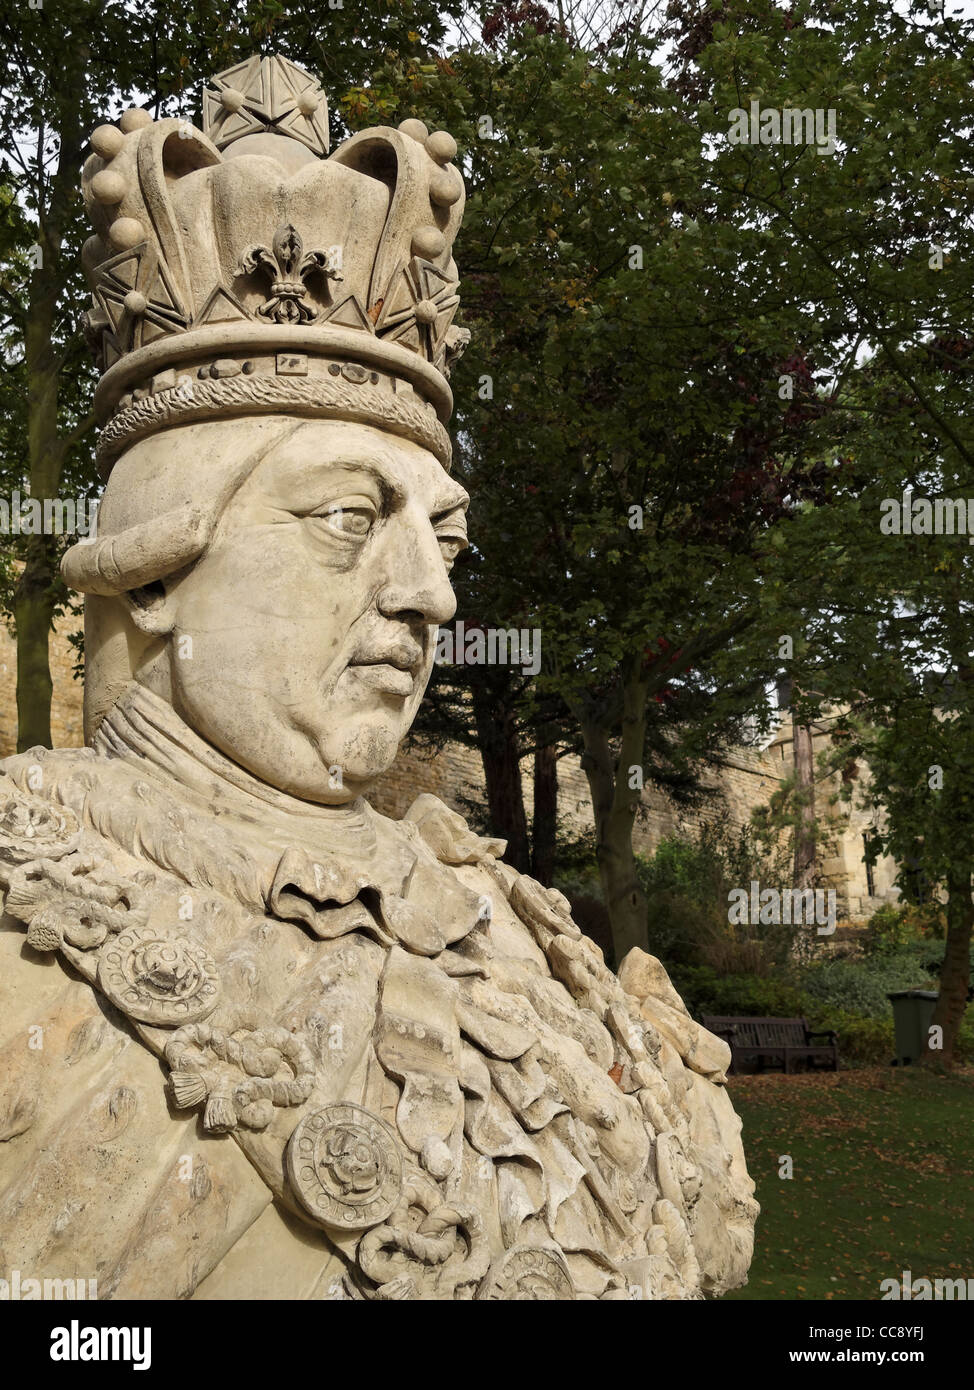 A bust of King George III in the grounds of Lincoln castle, Lincolnshire, England. Stock Photo